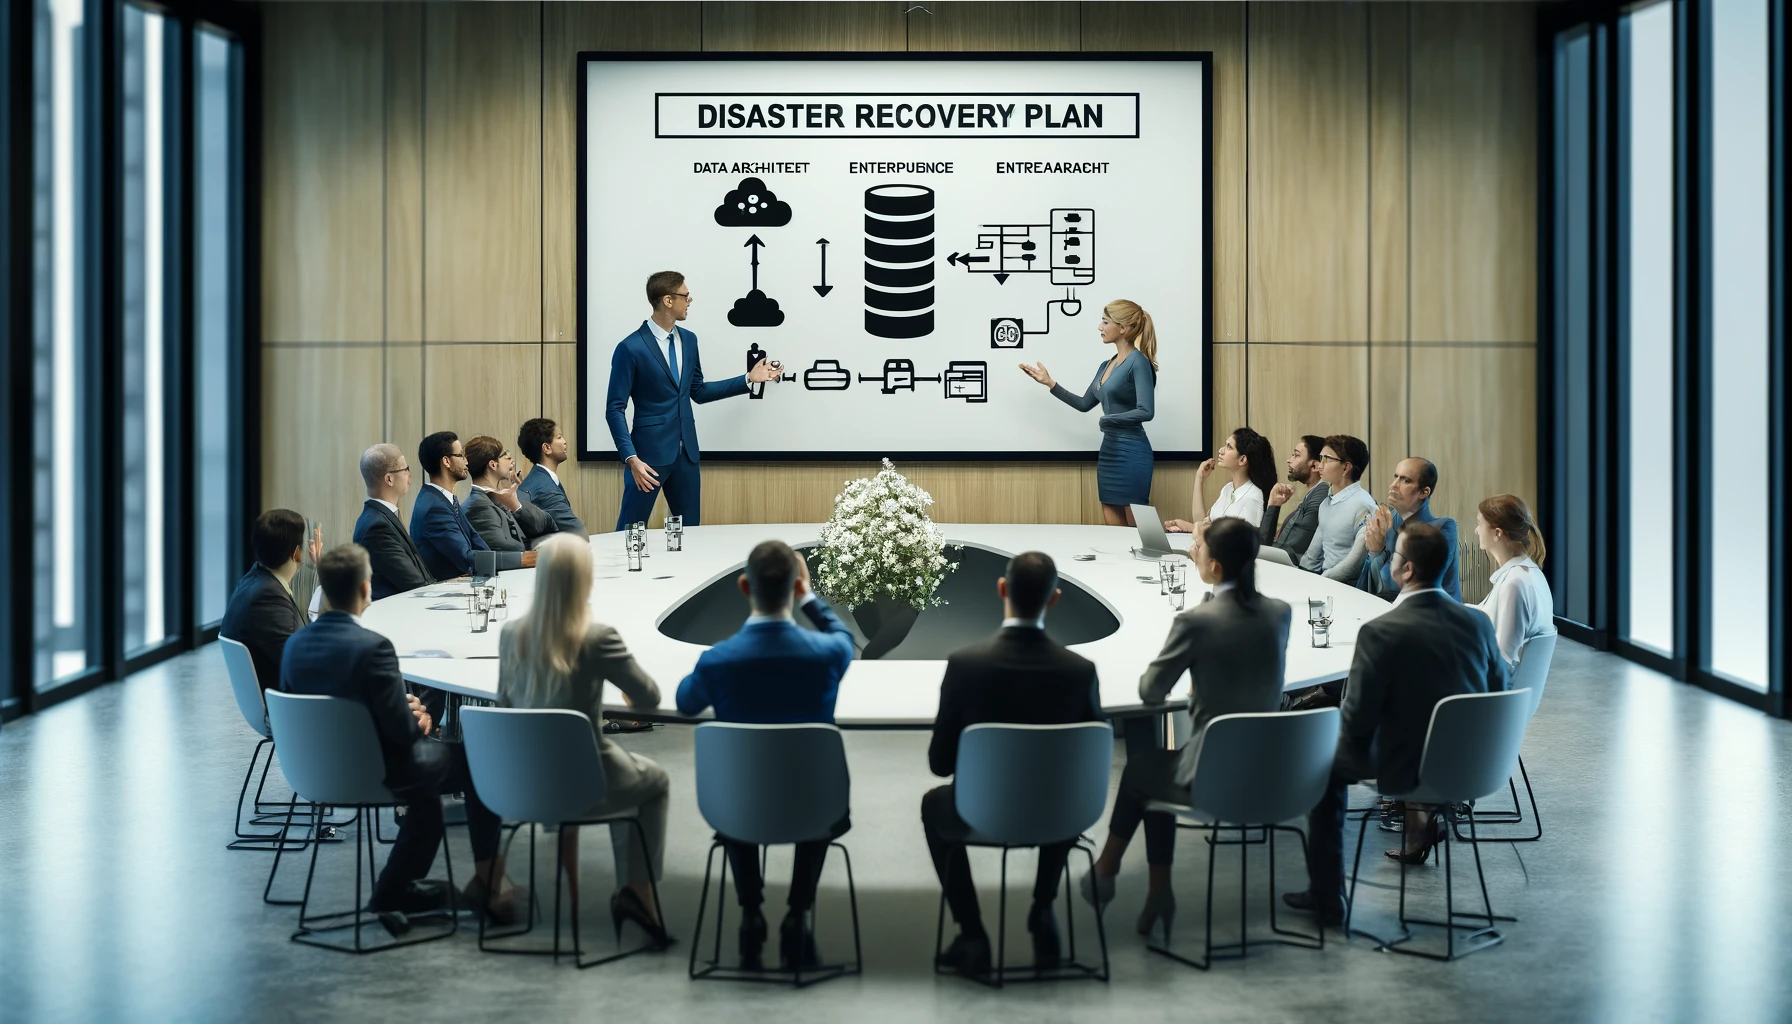 towncraft-technologies-presenting-disaster-recovery-plan